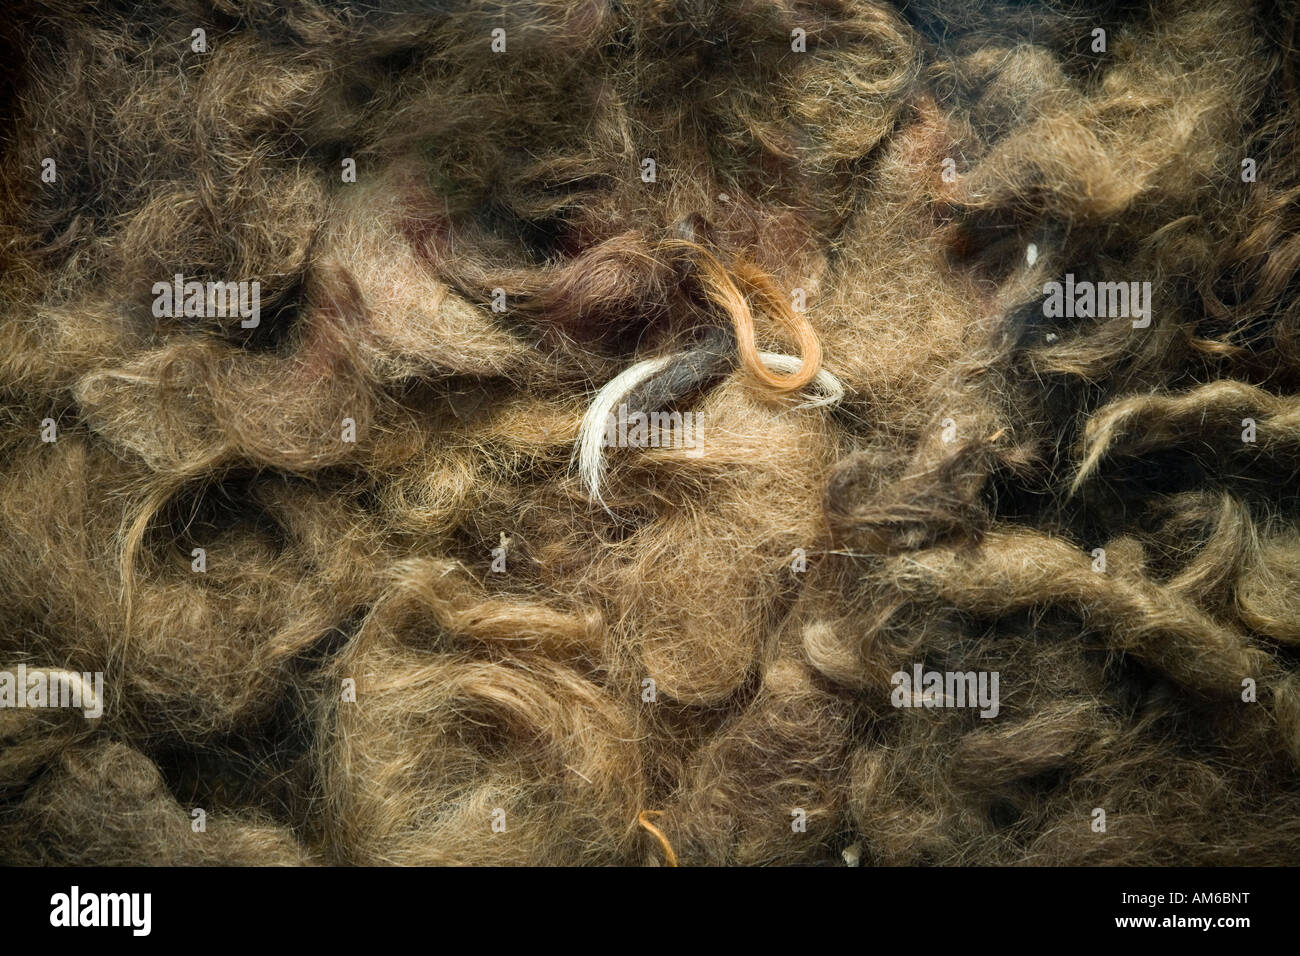 Hair taken from Nazi victims was sold to the textile industry, Majdanek Death Camp. Stock Photo